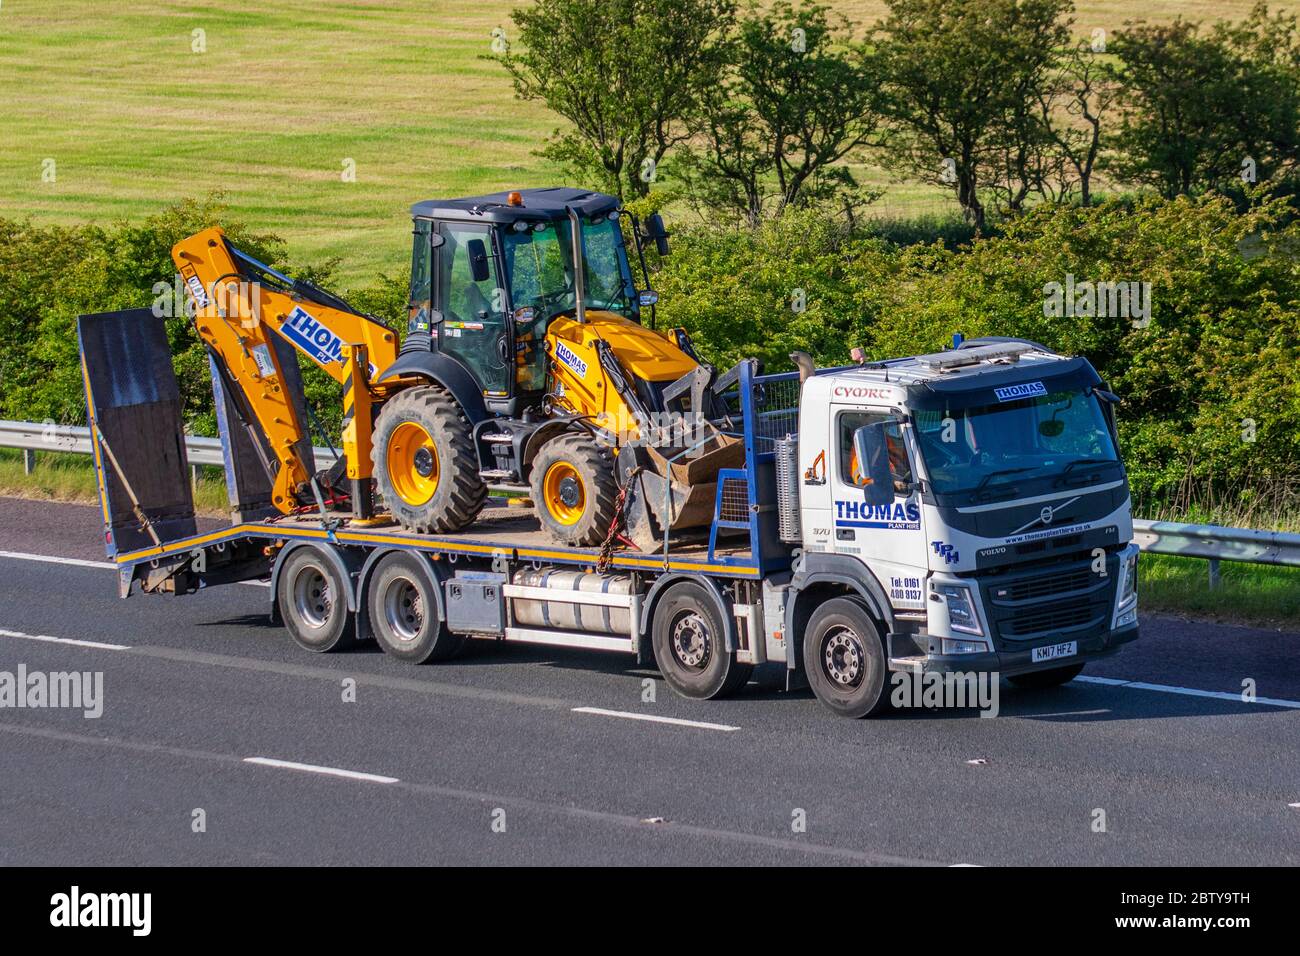 Thomas Plant Hire Wales; Haulage delivery trucks, lorry, transportation, truck, trailer carrying JCB 3CX backhoe loader, lowloader cargo carrier, Volvo vehicle, European commercial transport industry HGV, M6 at Manchester, UK Stock Photo